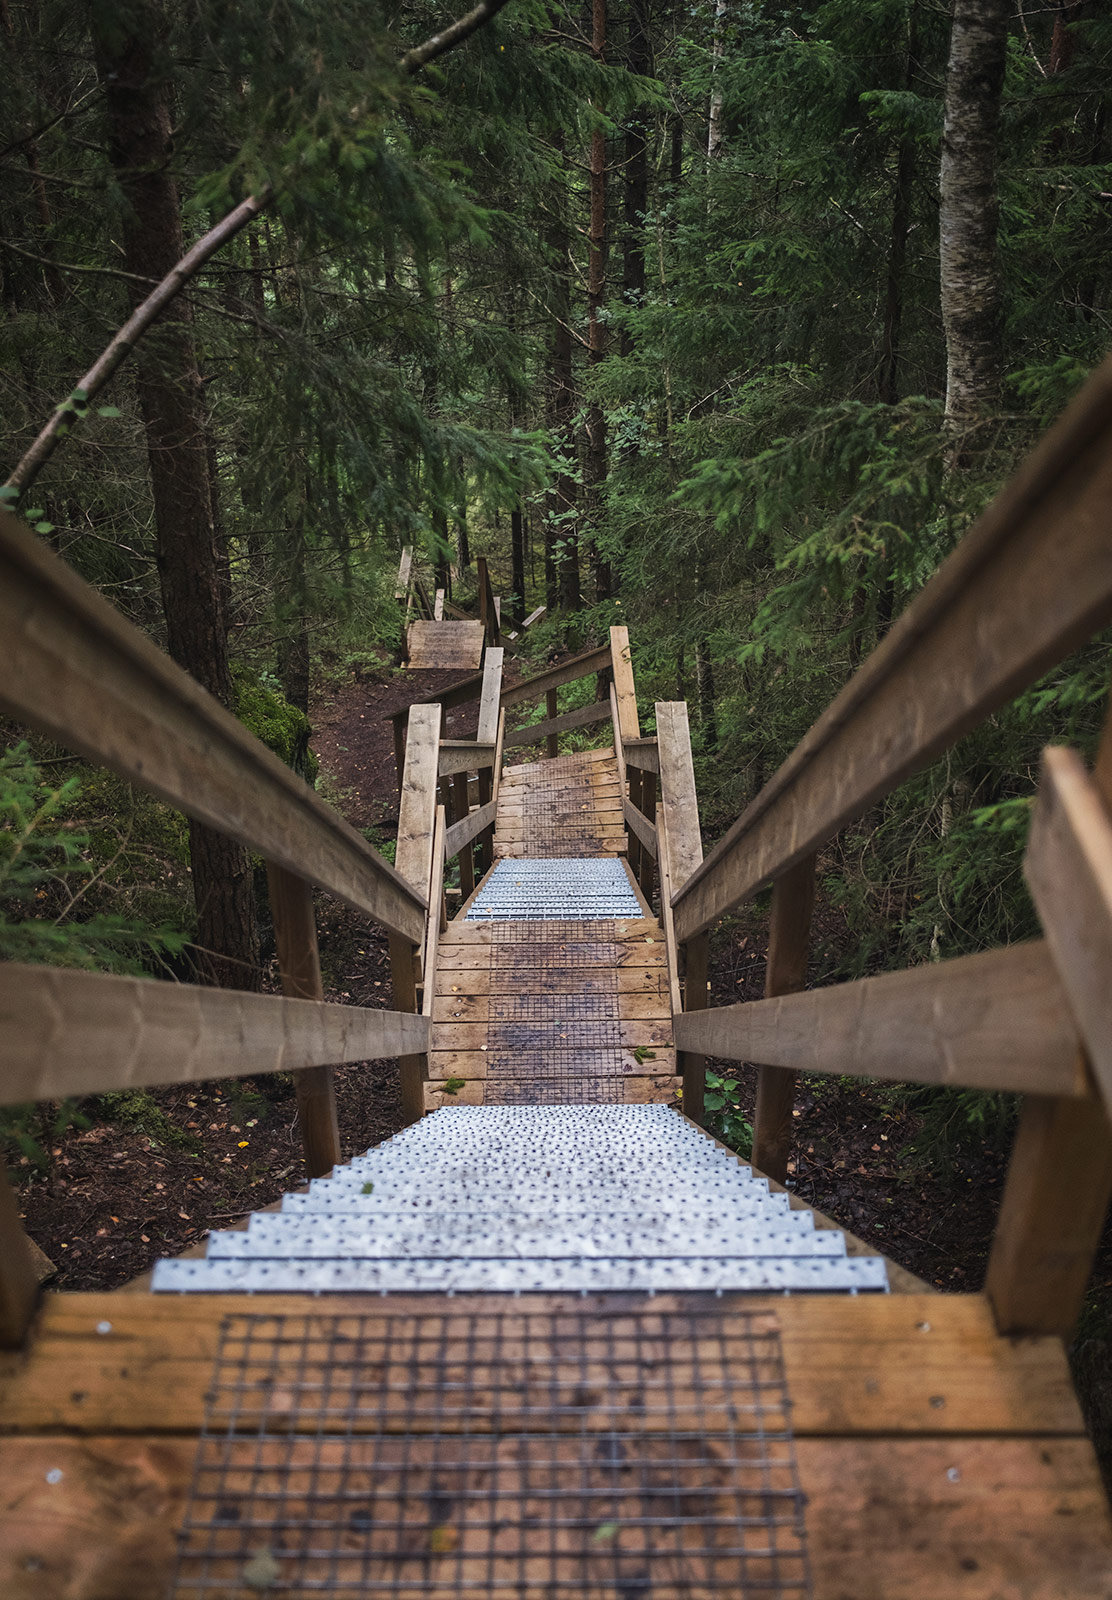 Raised wooden path in the forest